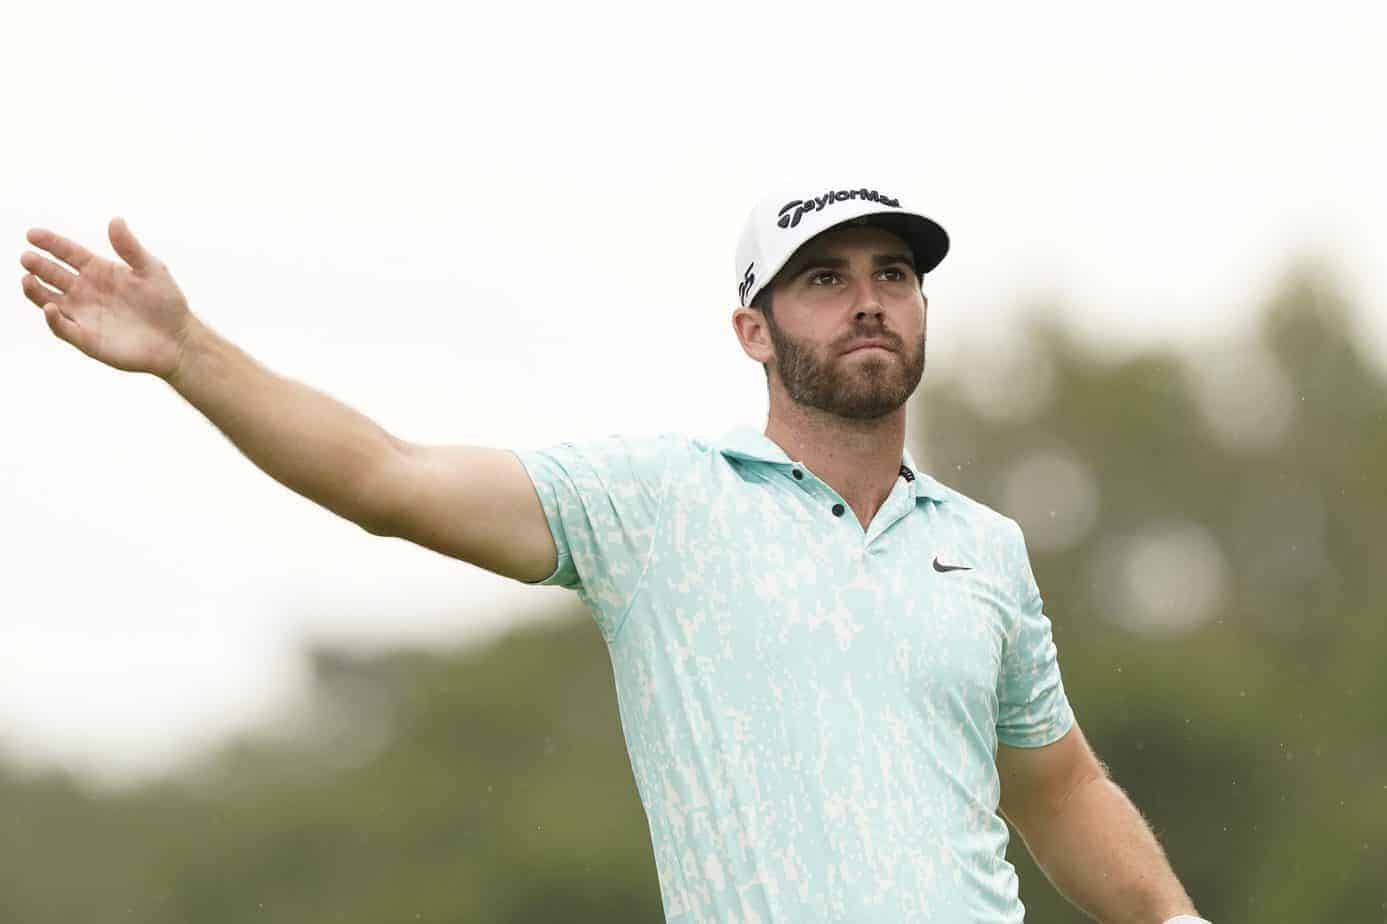 Awesemo's Expert PGA DFS Picks, ownership projections and rankings for the Shiners Open, including Matthew Wolff, Adam Scott & Aaron Wise.